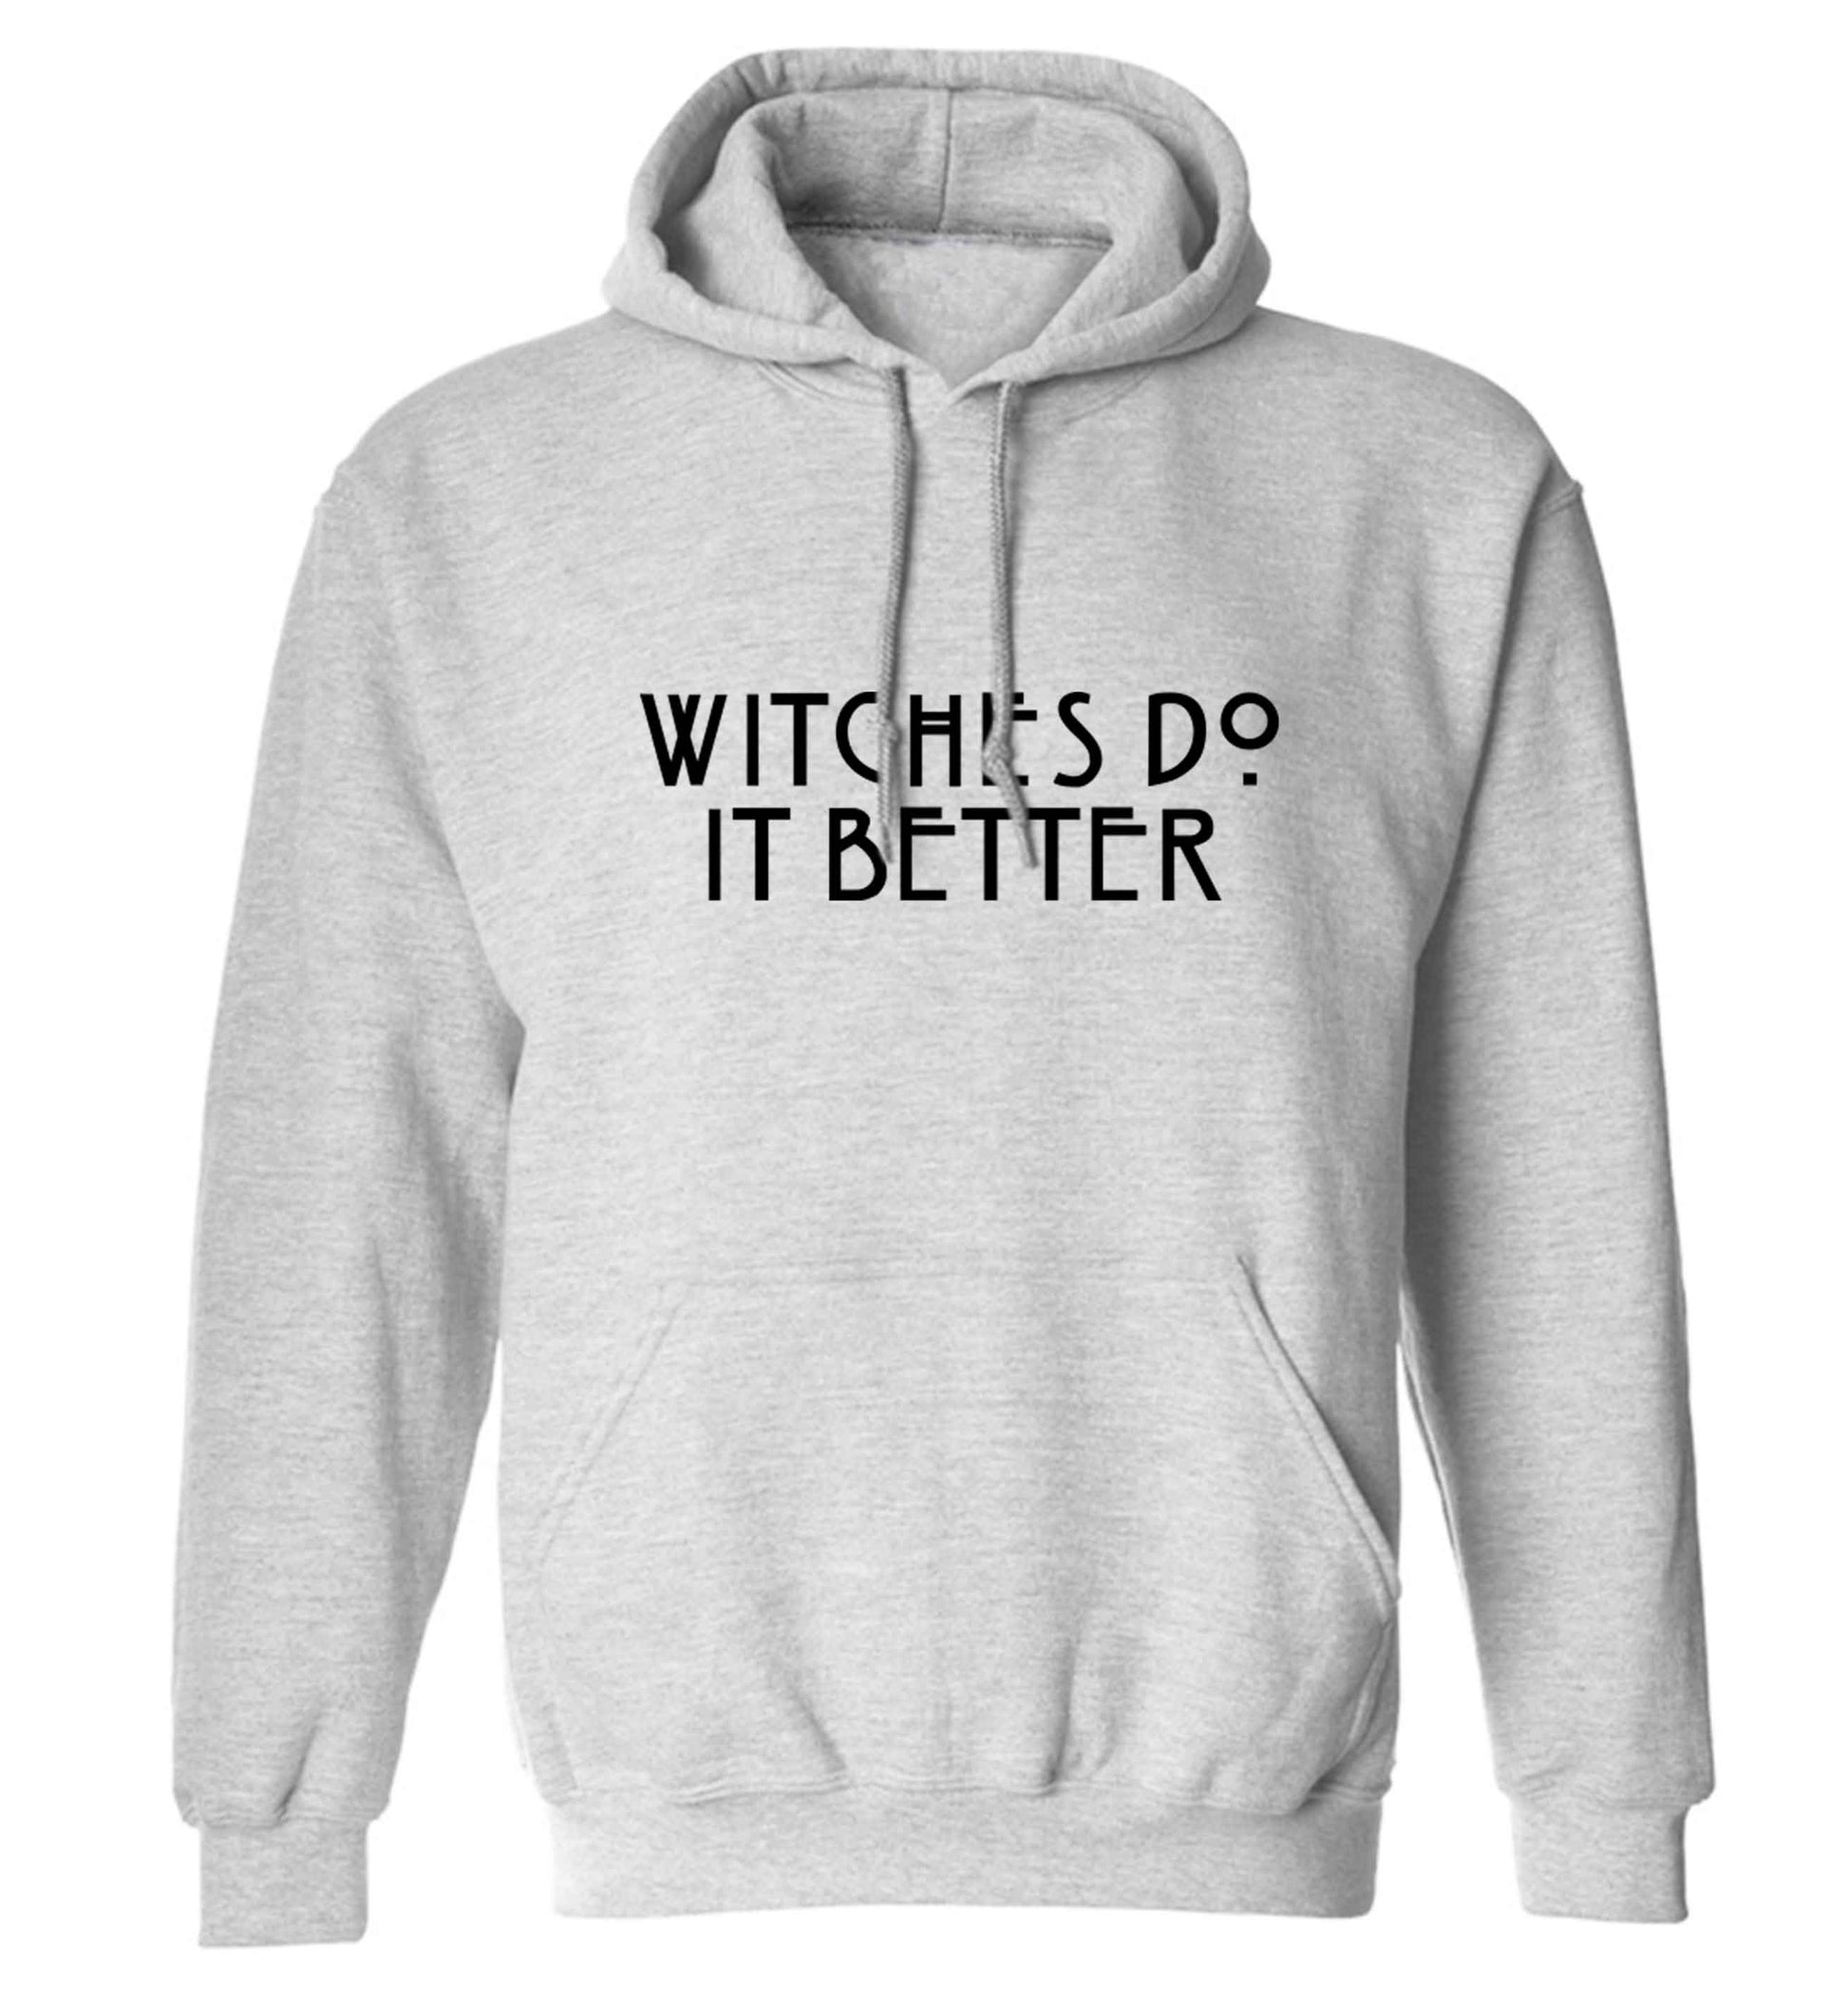 Witches do it better adults unisex grey hoodie 2XL